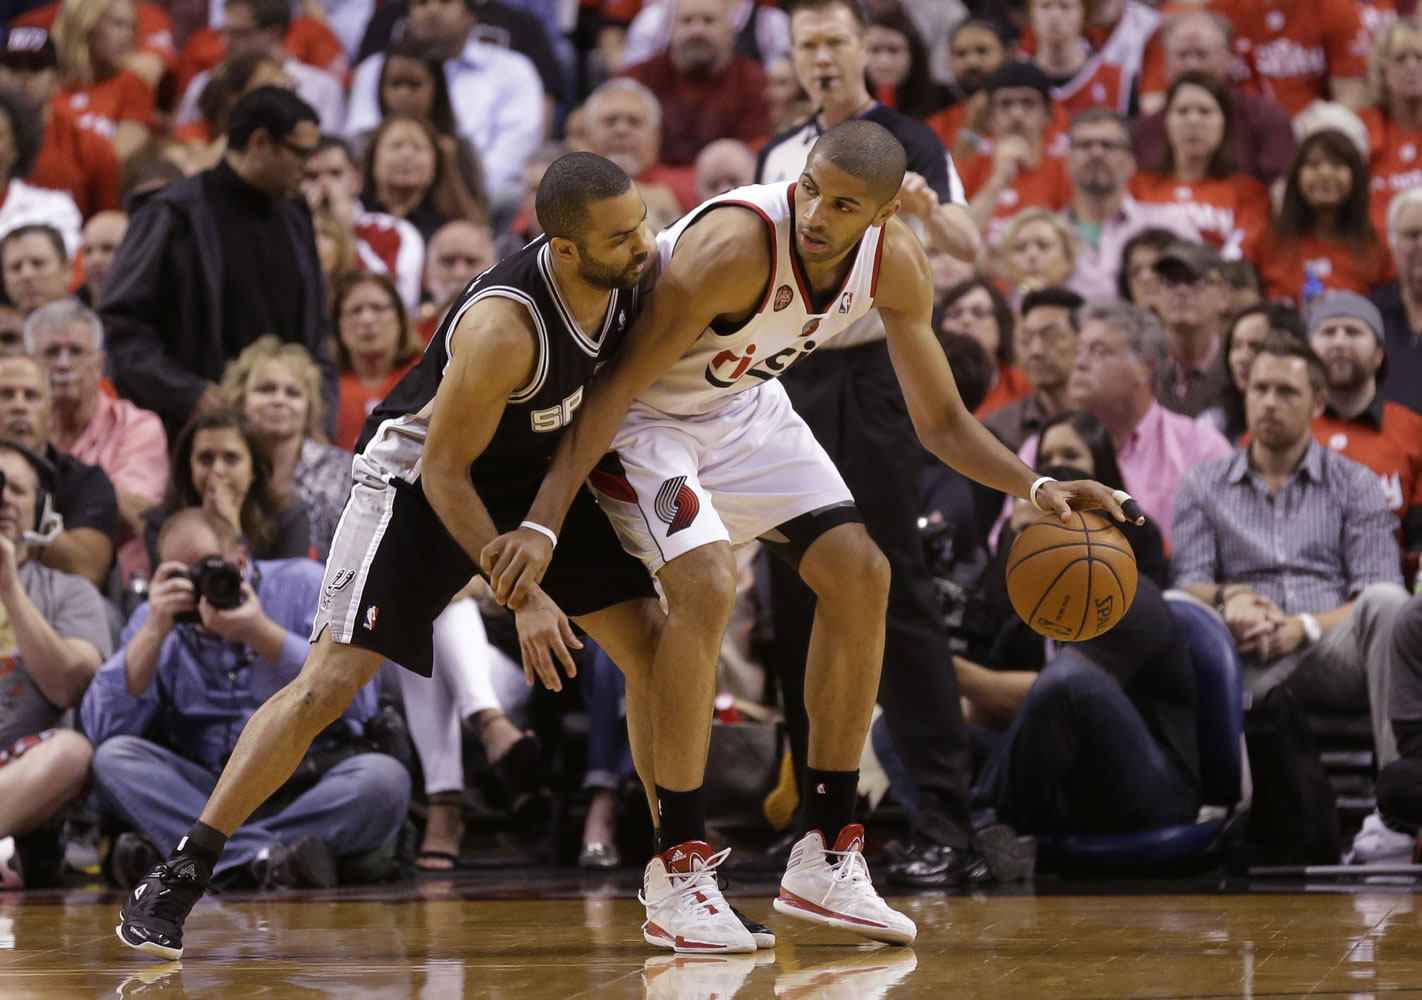 Parker sees Blazers' Batum as future of French team